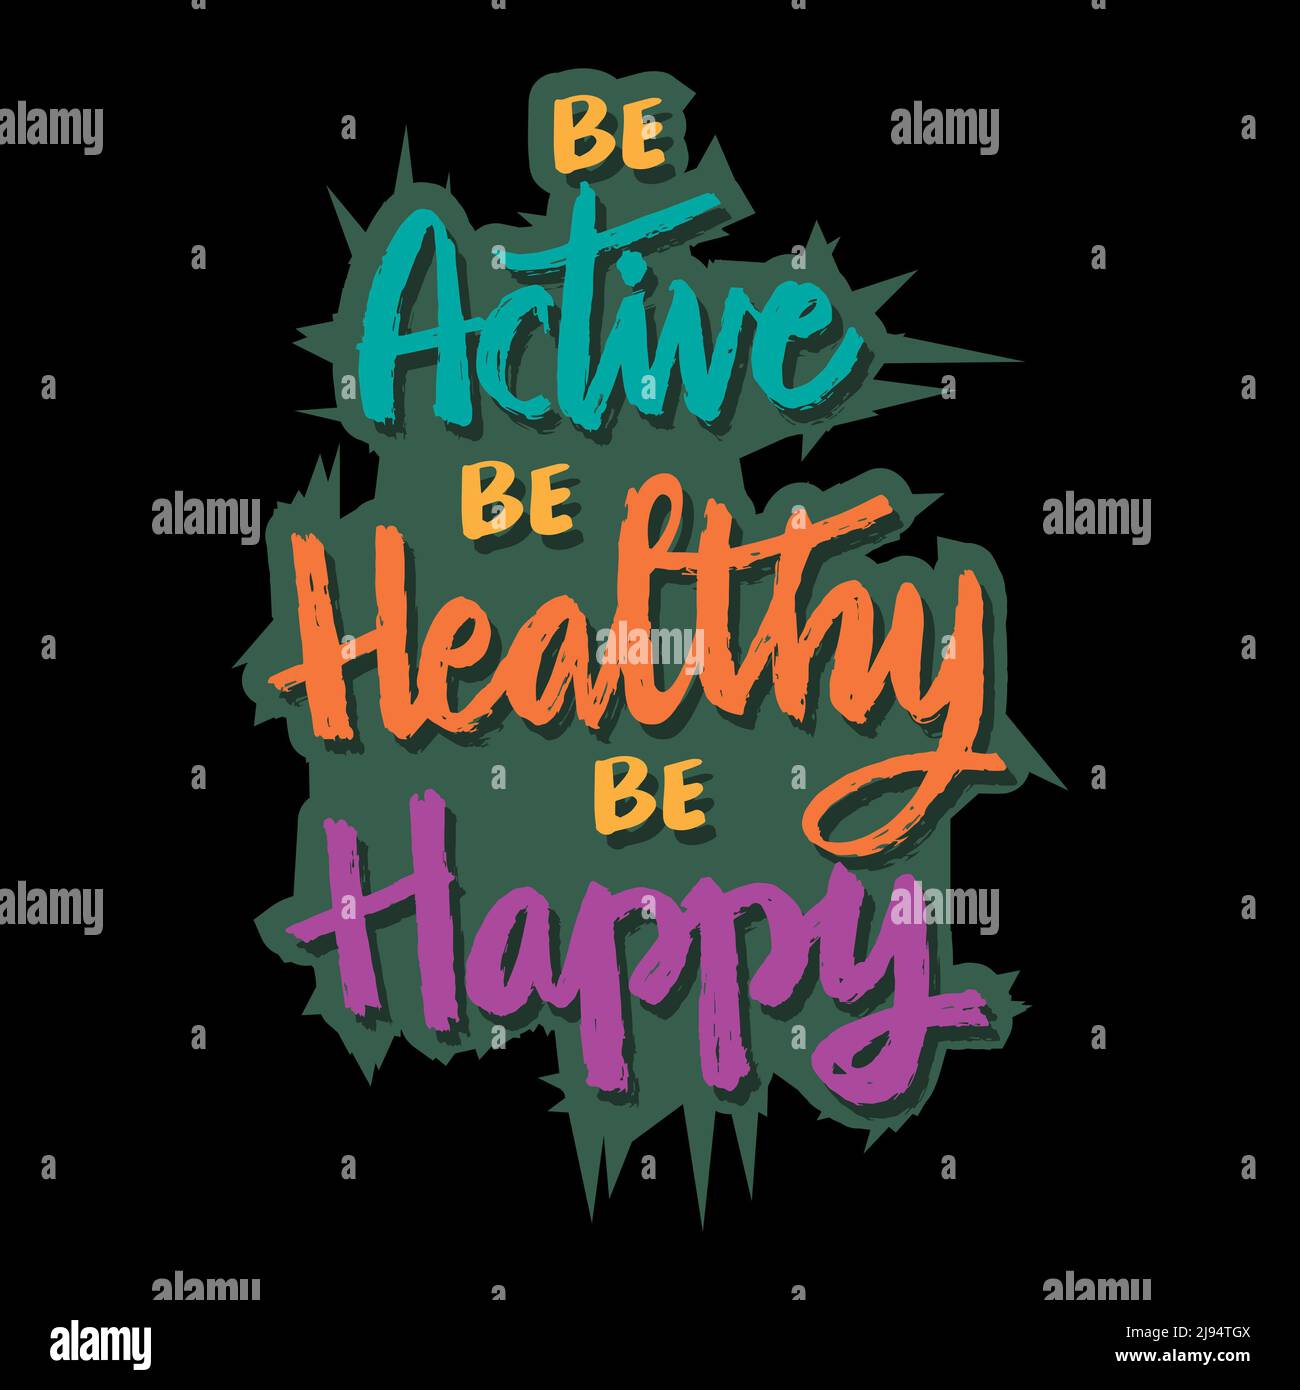 Be active, be healthy, be happy. Poster quotes Stock Photo - Alamy